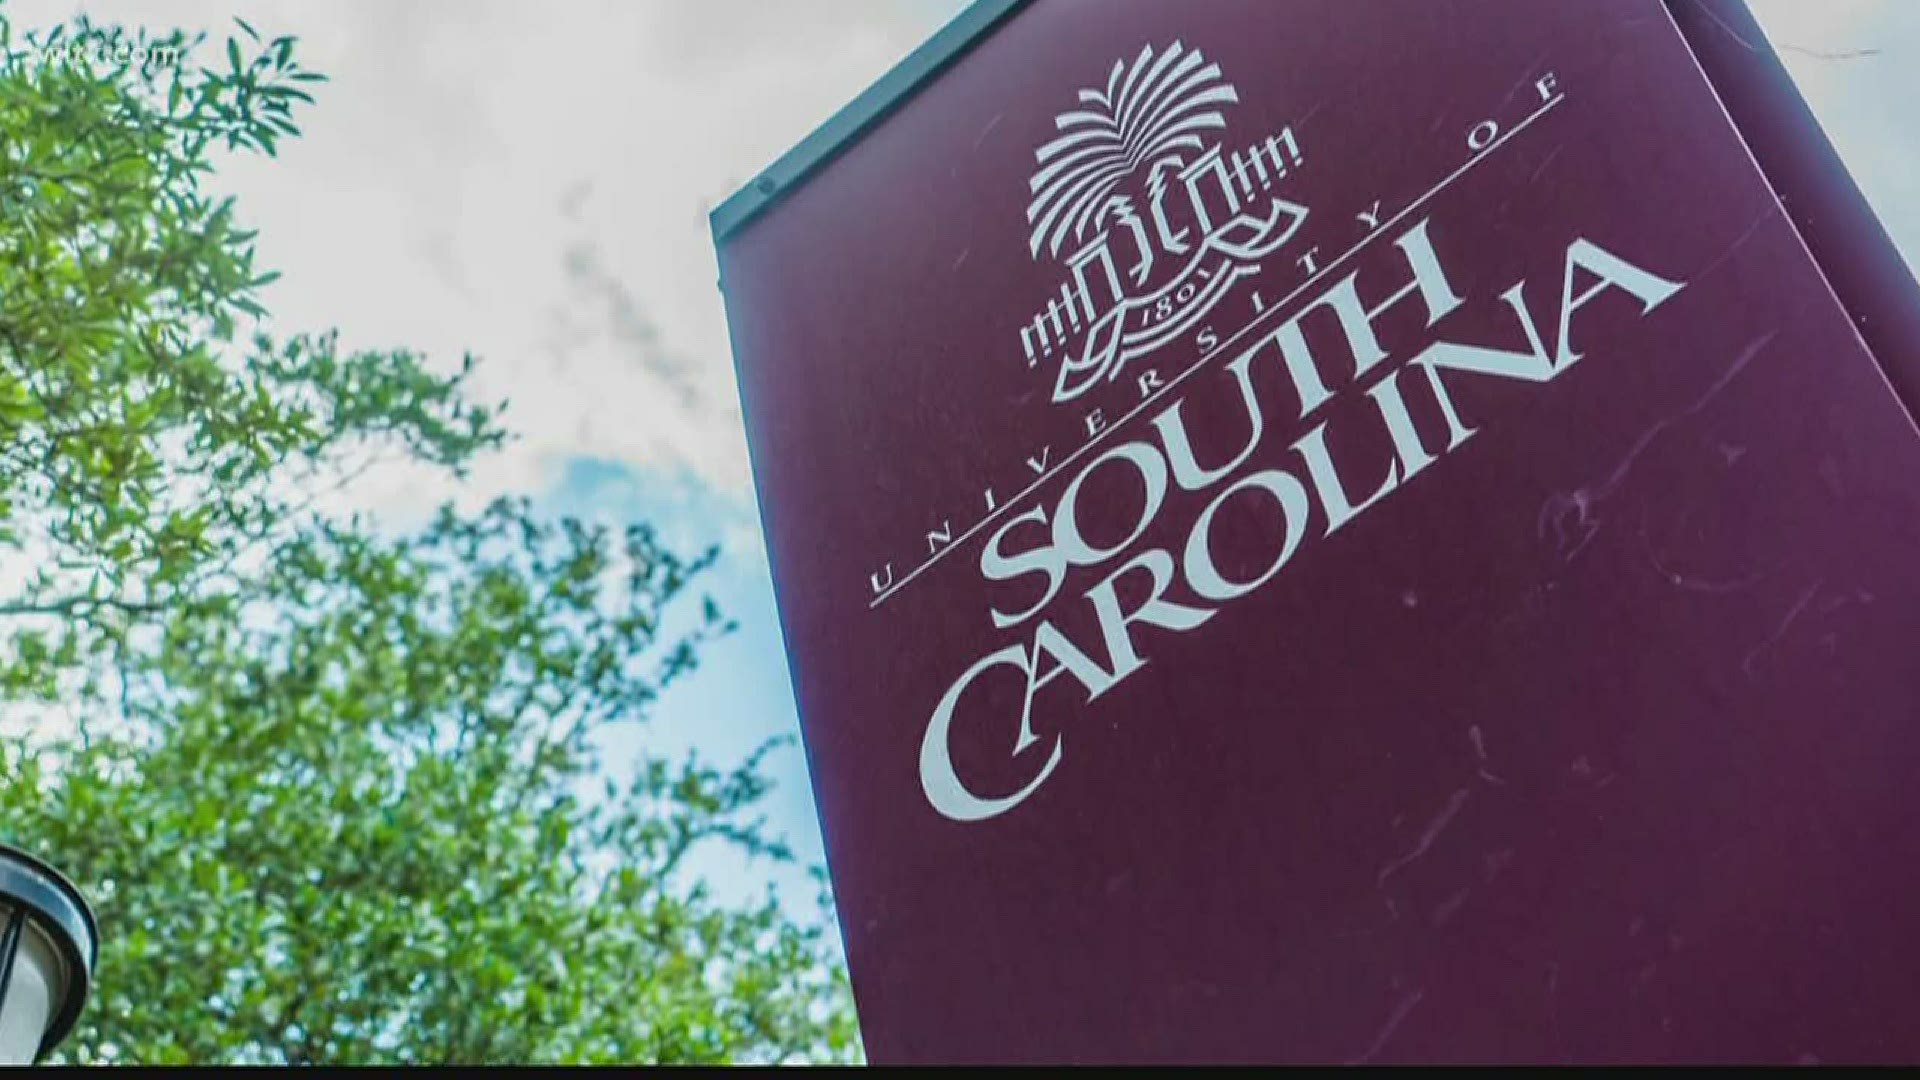 The University of South Carolina's Board of Trustees met Friday to discuss their future plans.